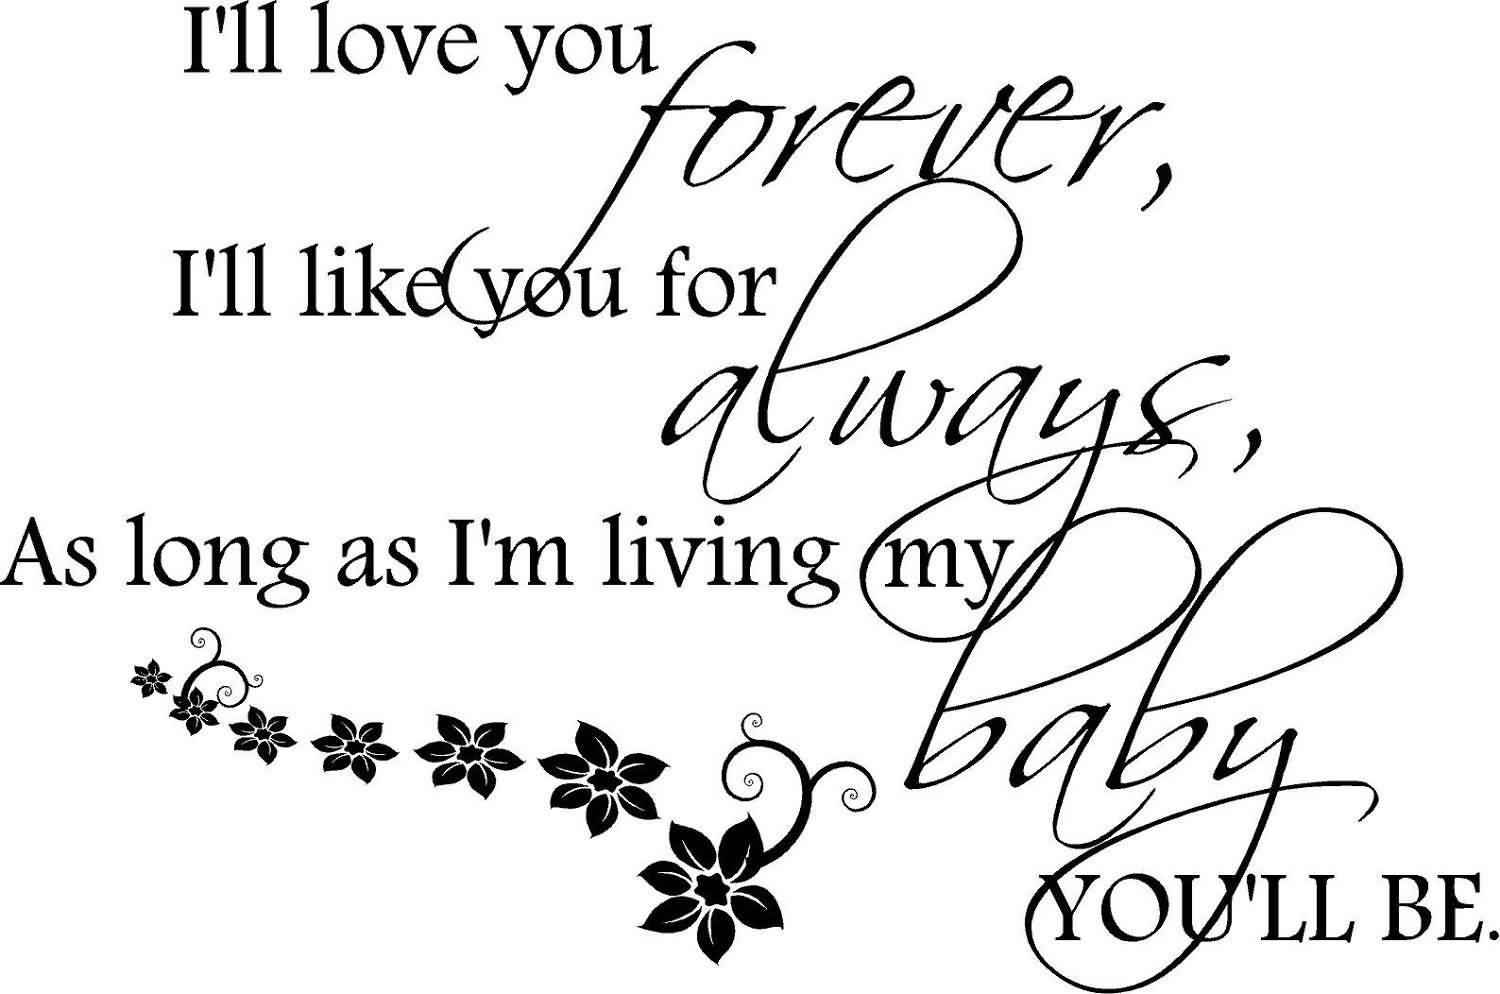 20 I Ll Love You Forever Book Quotes & Images